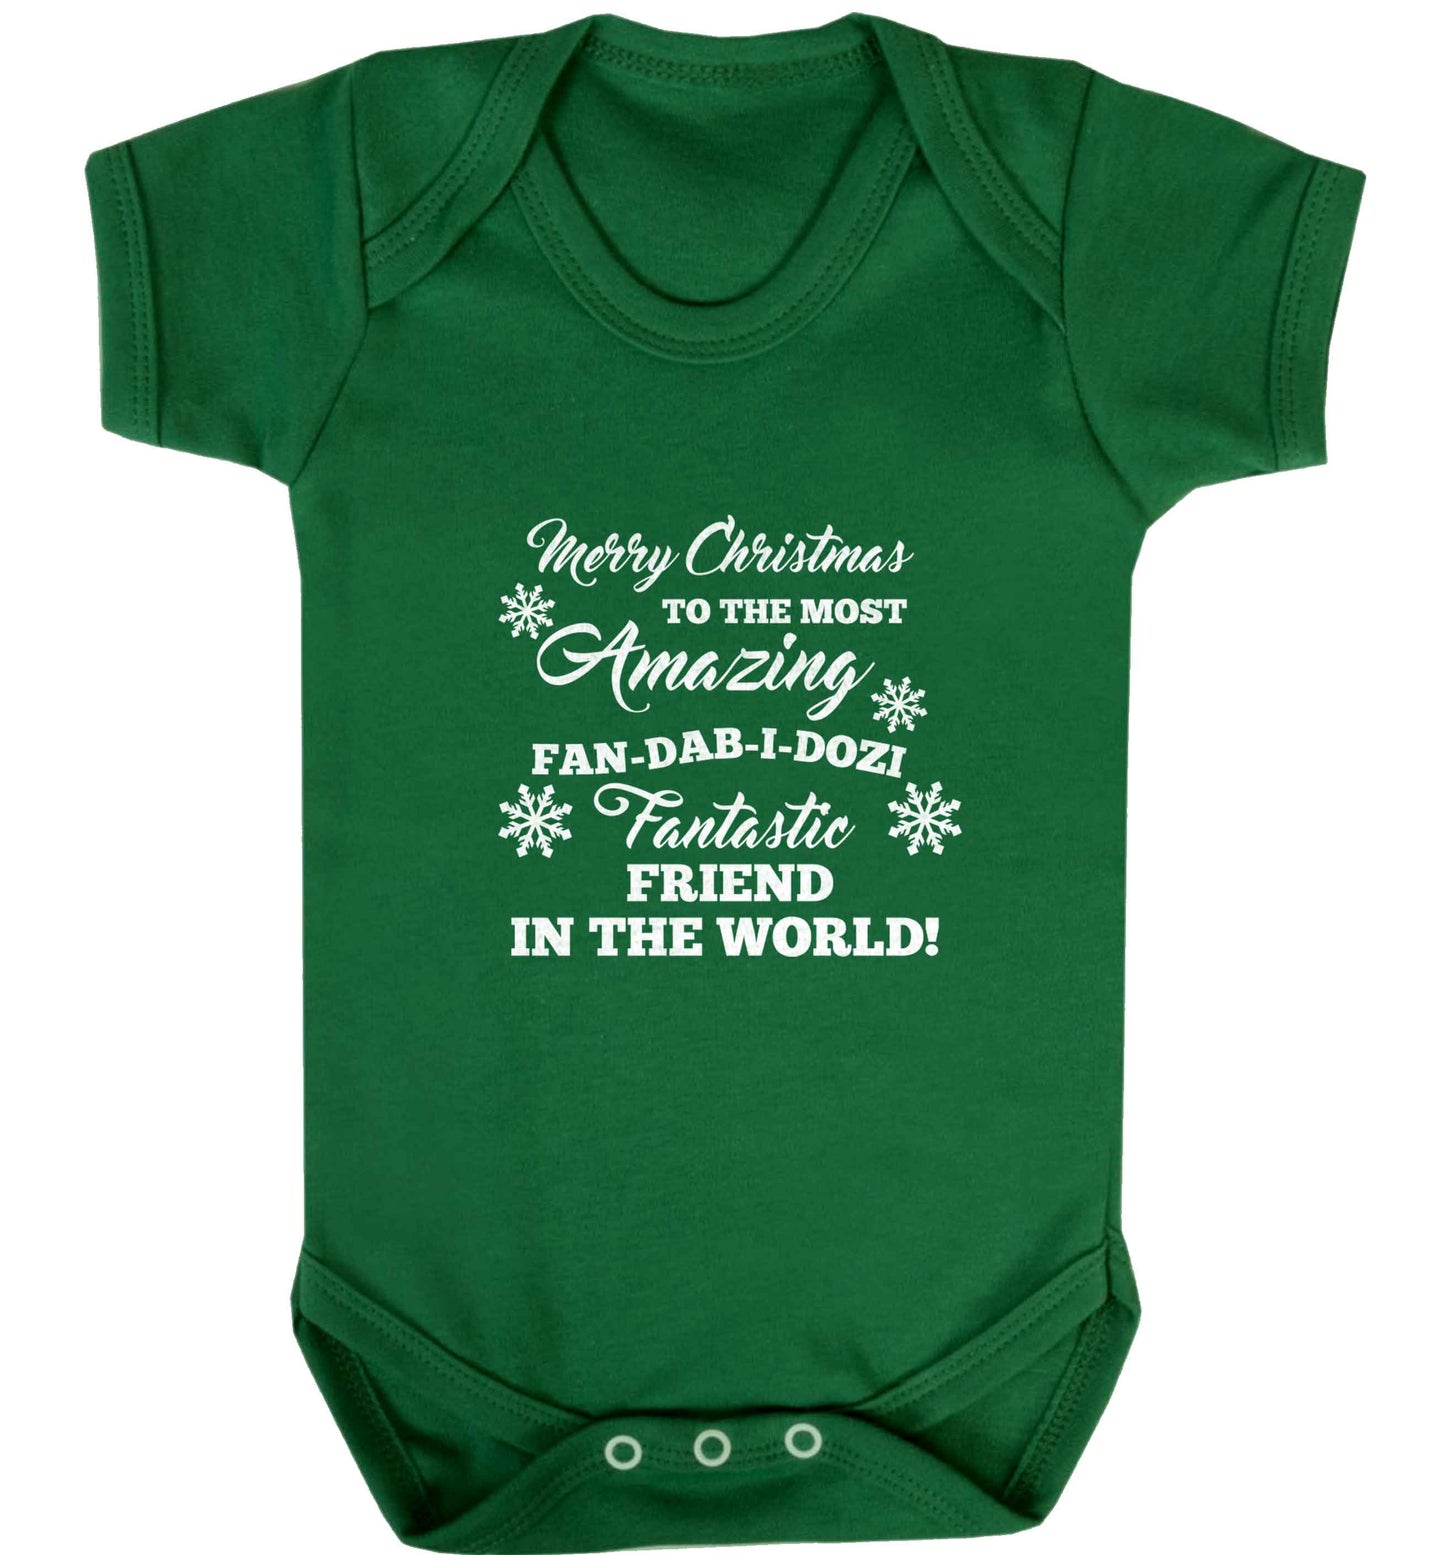 Merry Christmas to the most amazing fan-dab-i-dozi fantasic friend in the world baby vest green 18-24 months